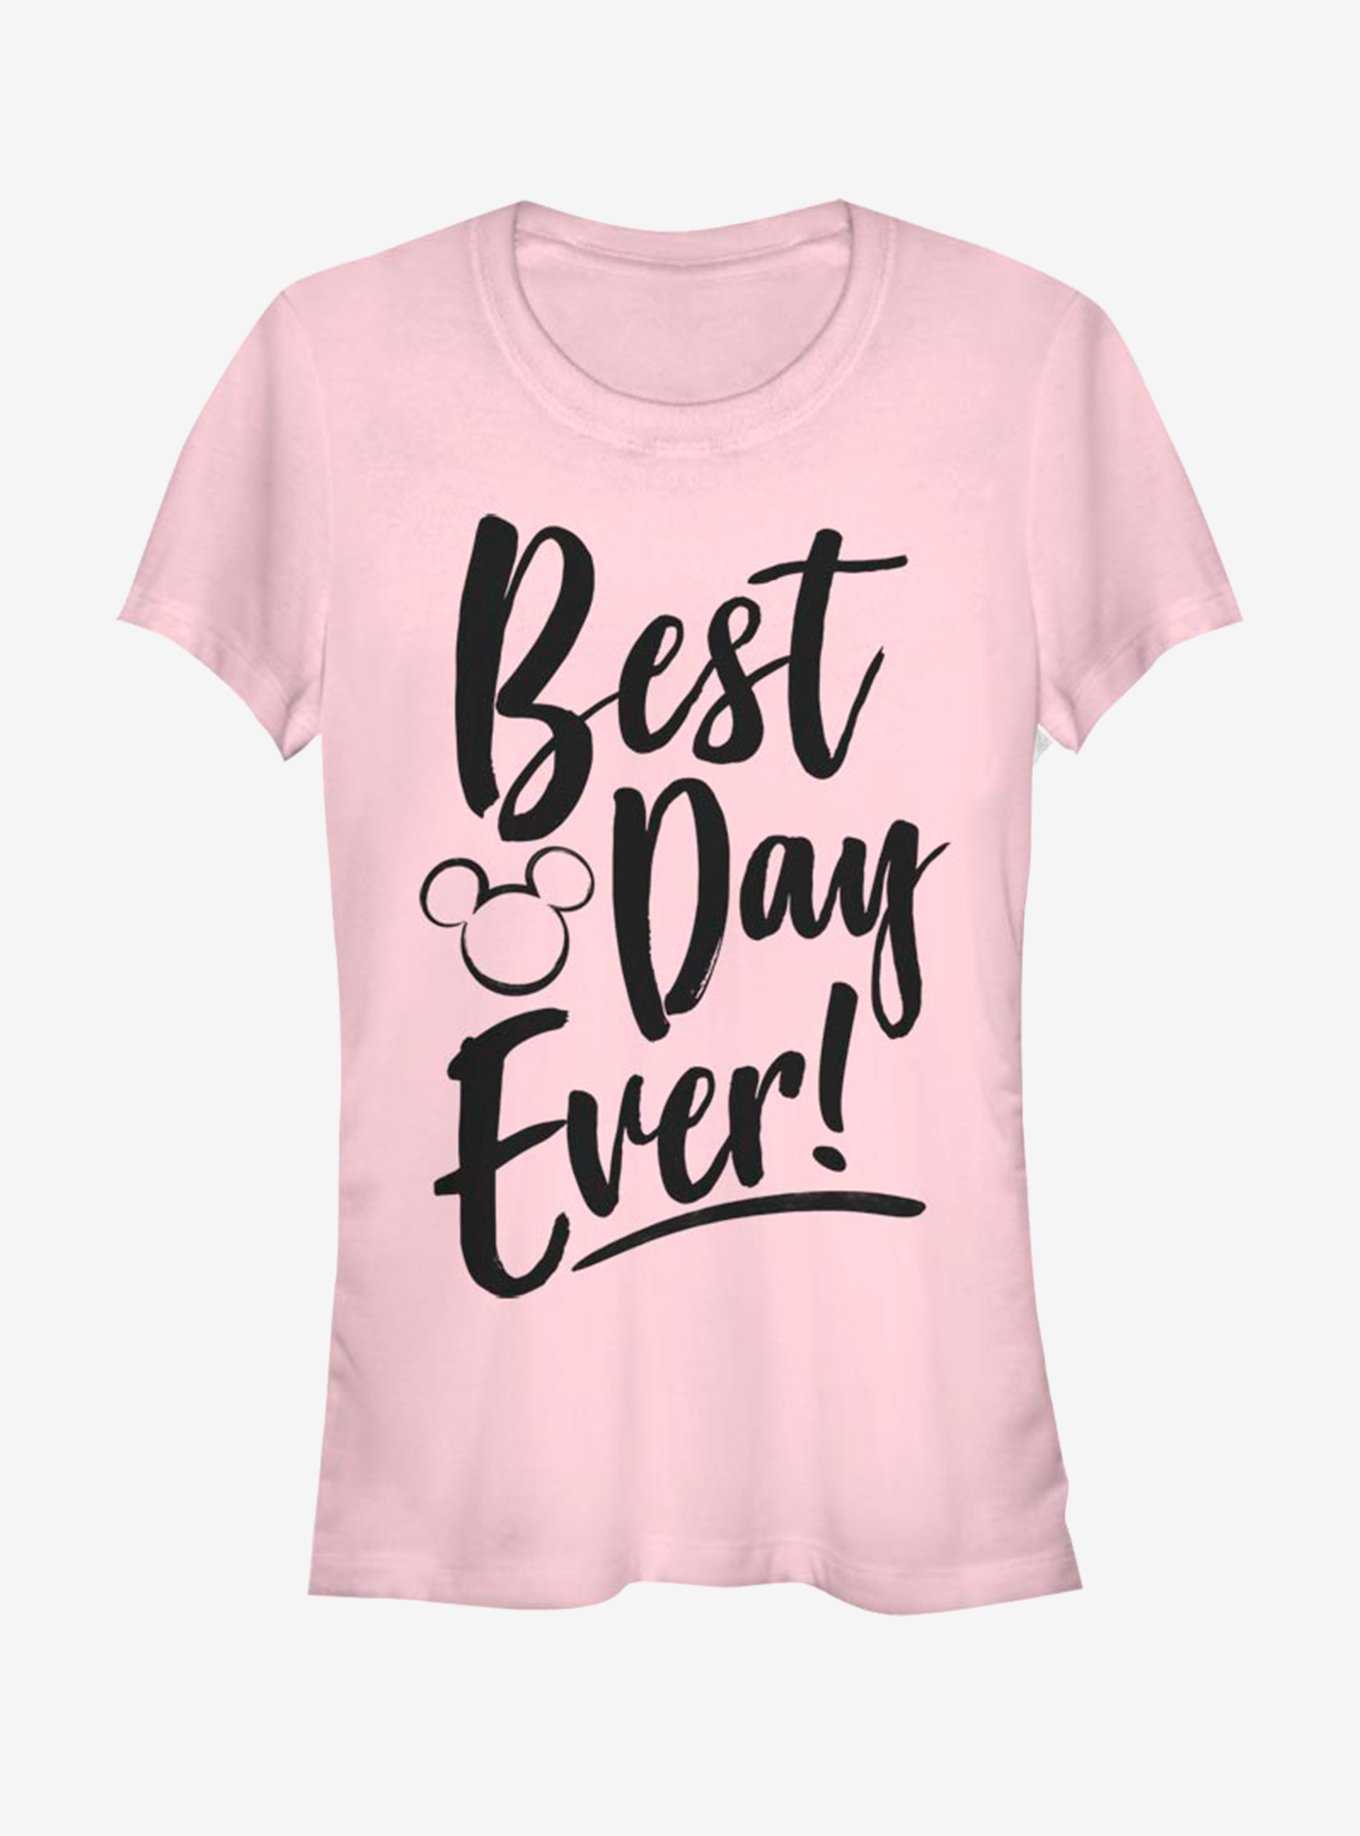 Disney Mickey Mouse Best Day Girls T-Shirt, , hi-res